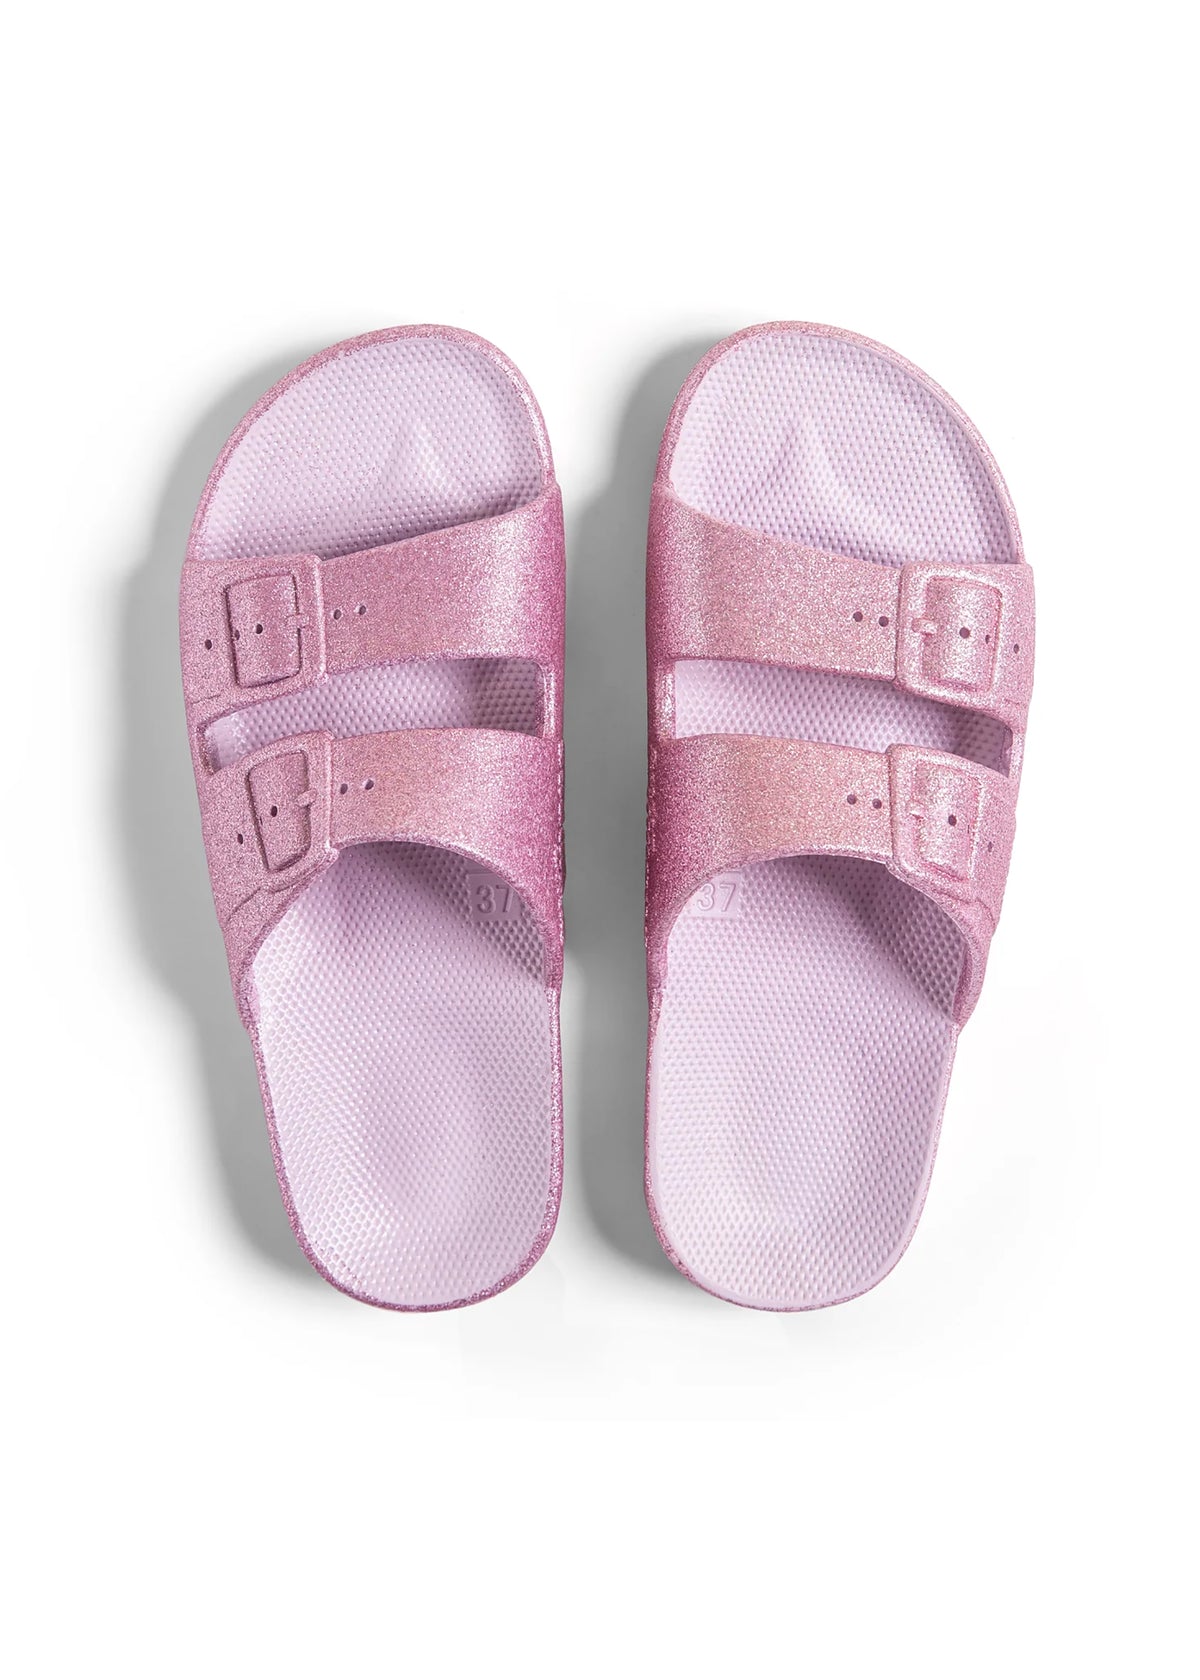 Freedom Moses sandals - wedges with two straps, Isla, pink glitter